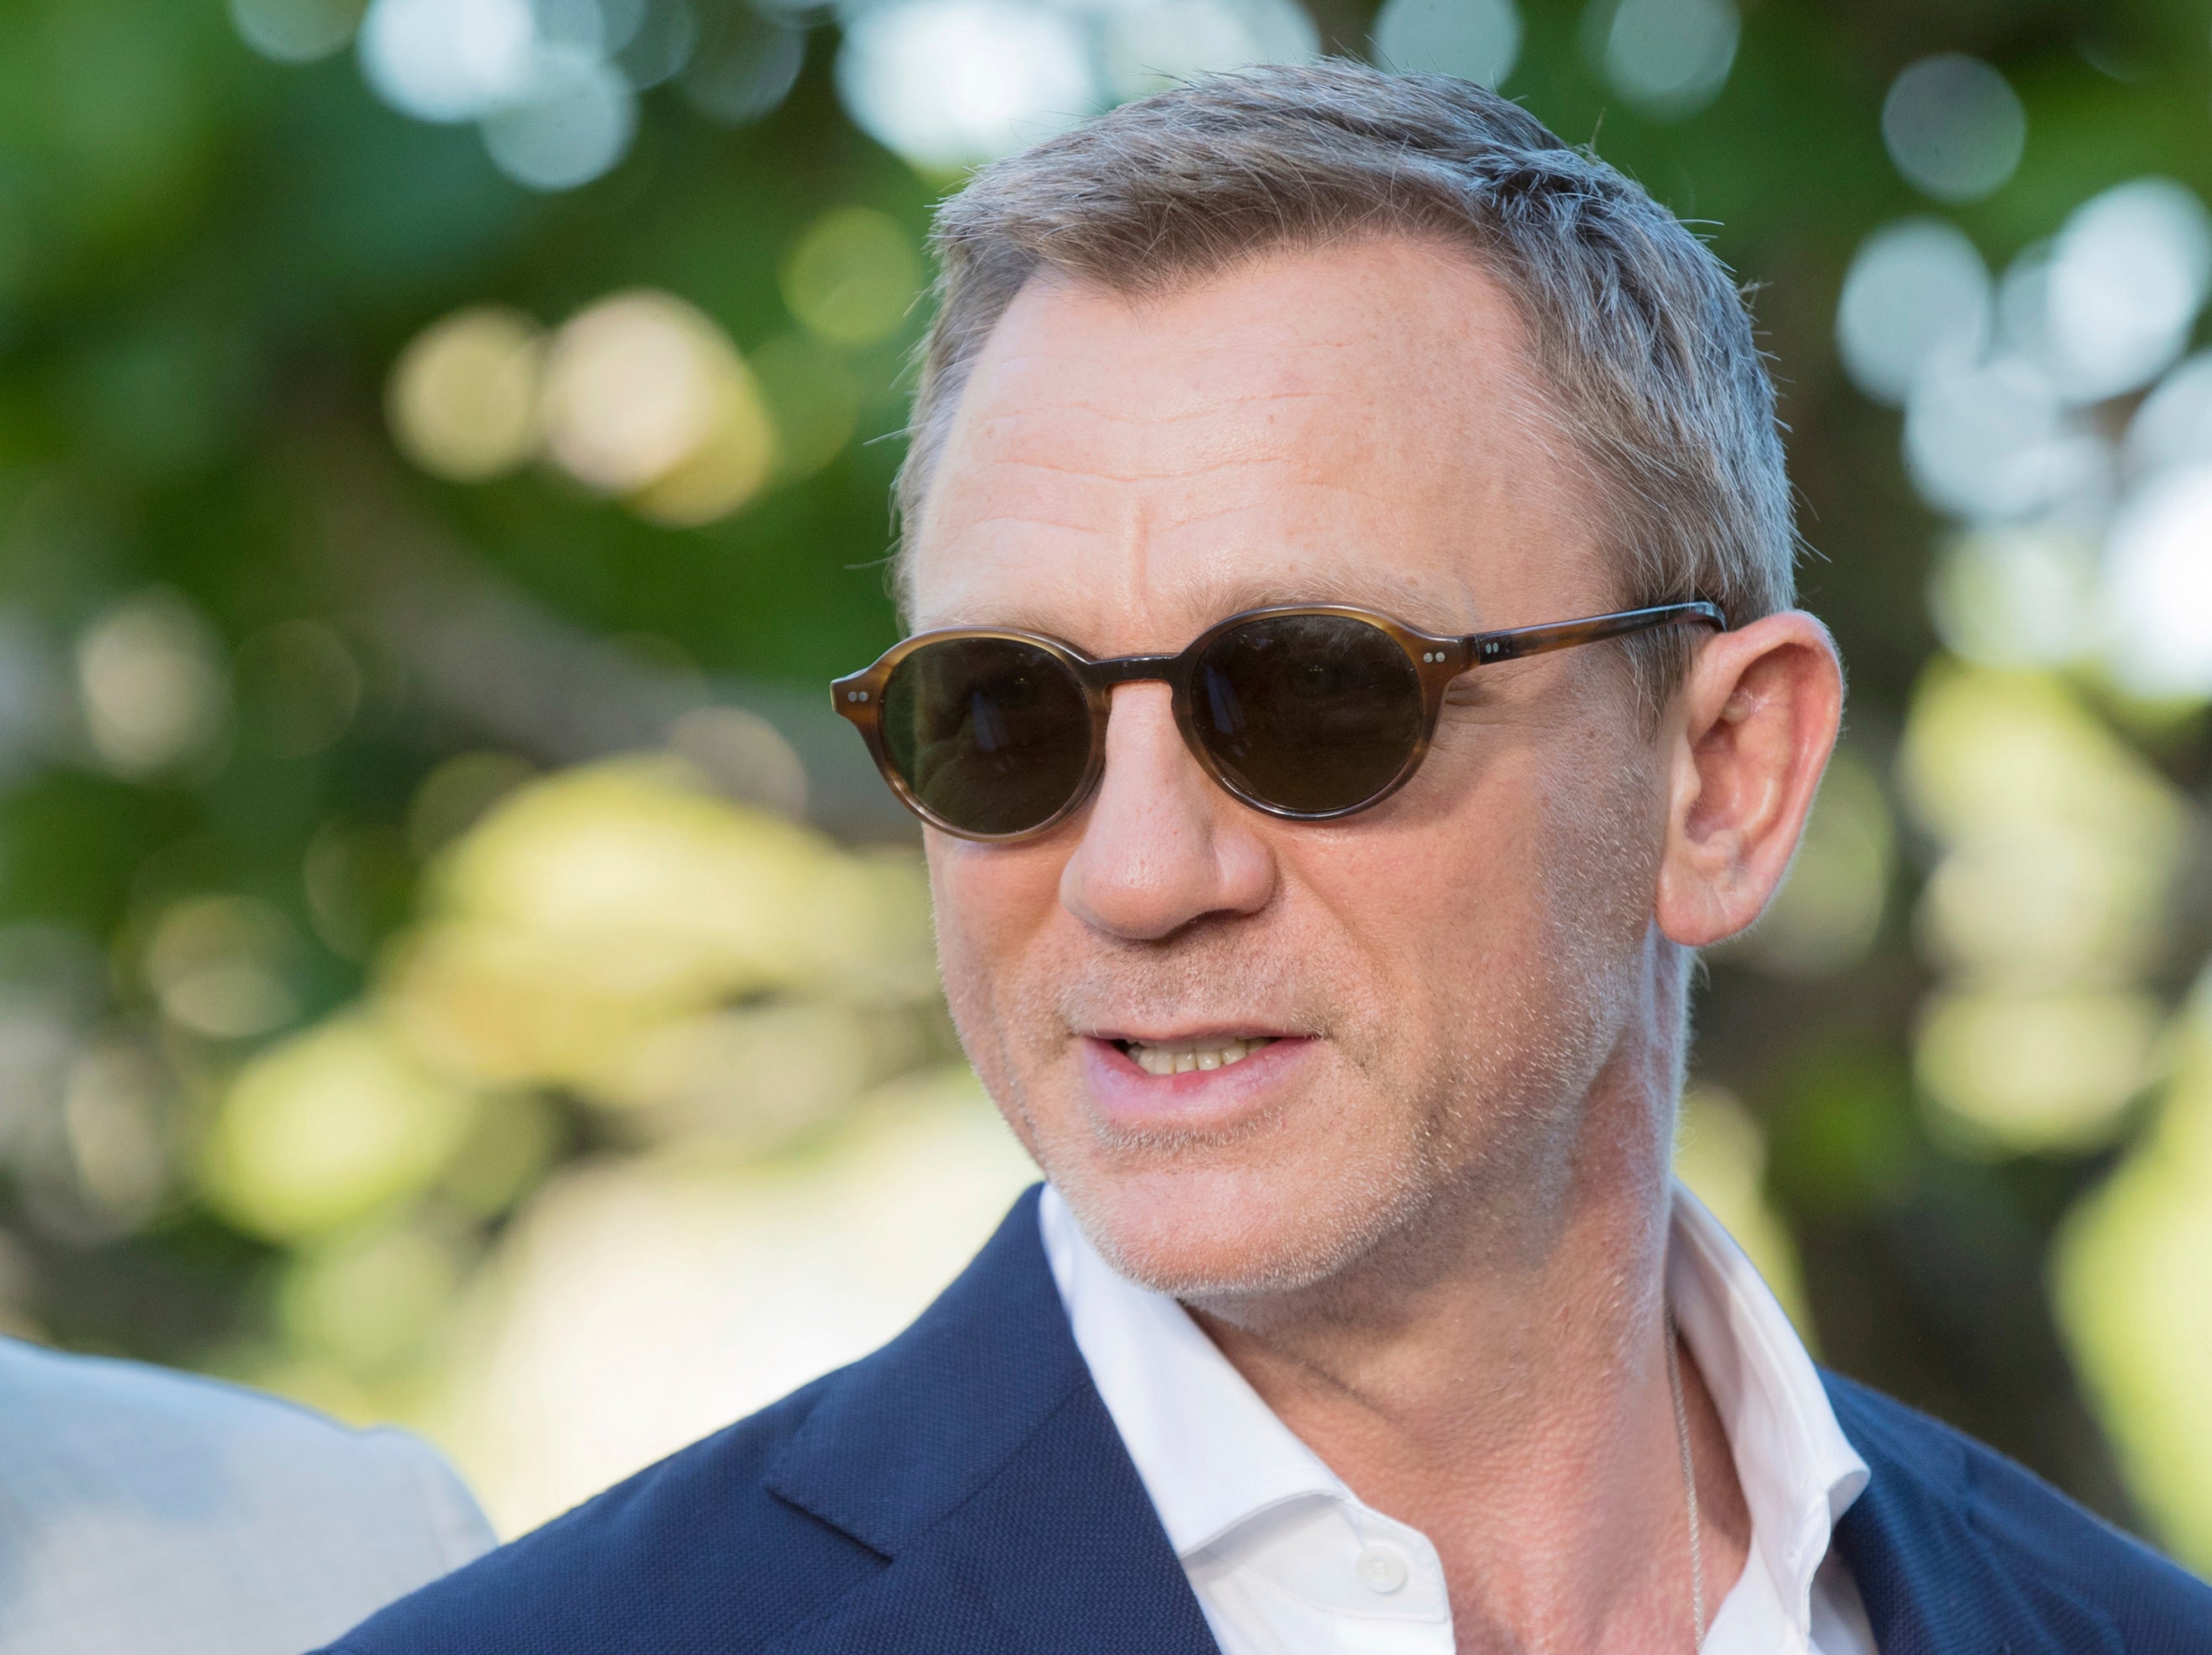 You only flit twice: the new James Bond film, starring Daniel Craig, has been delayed again